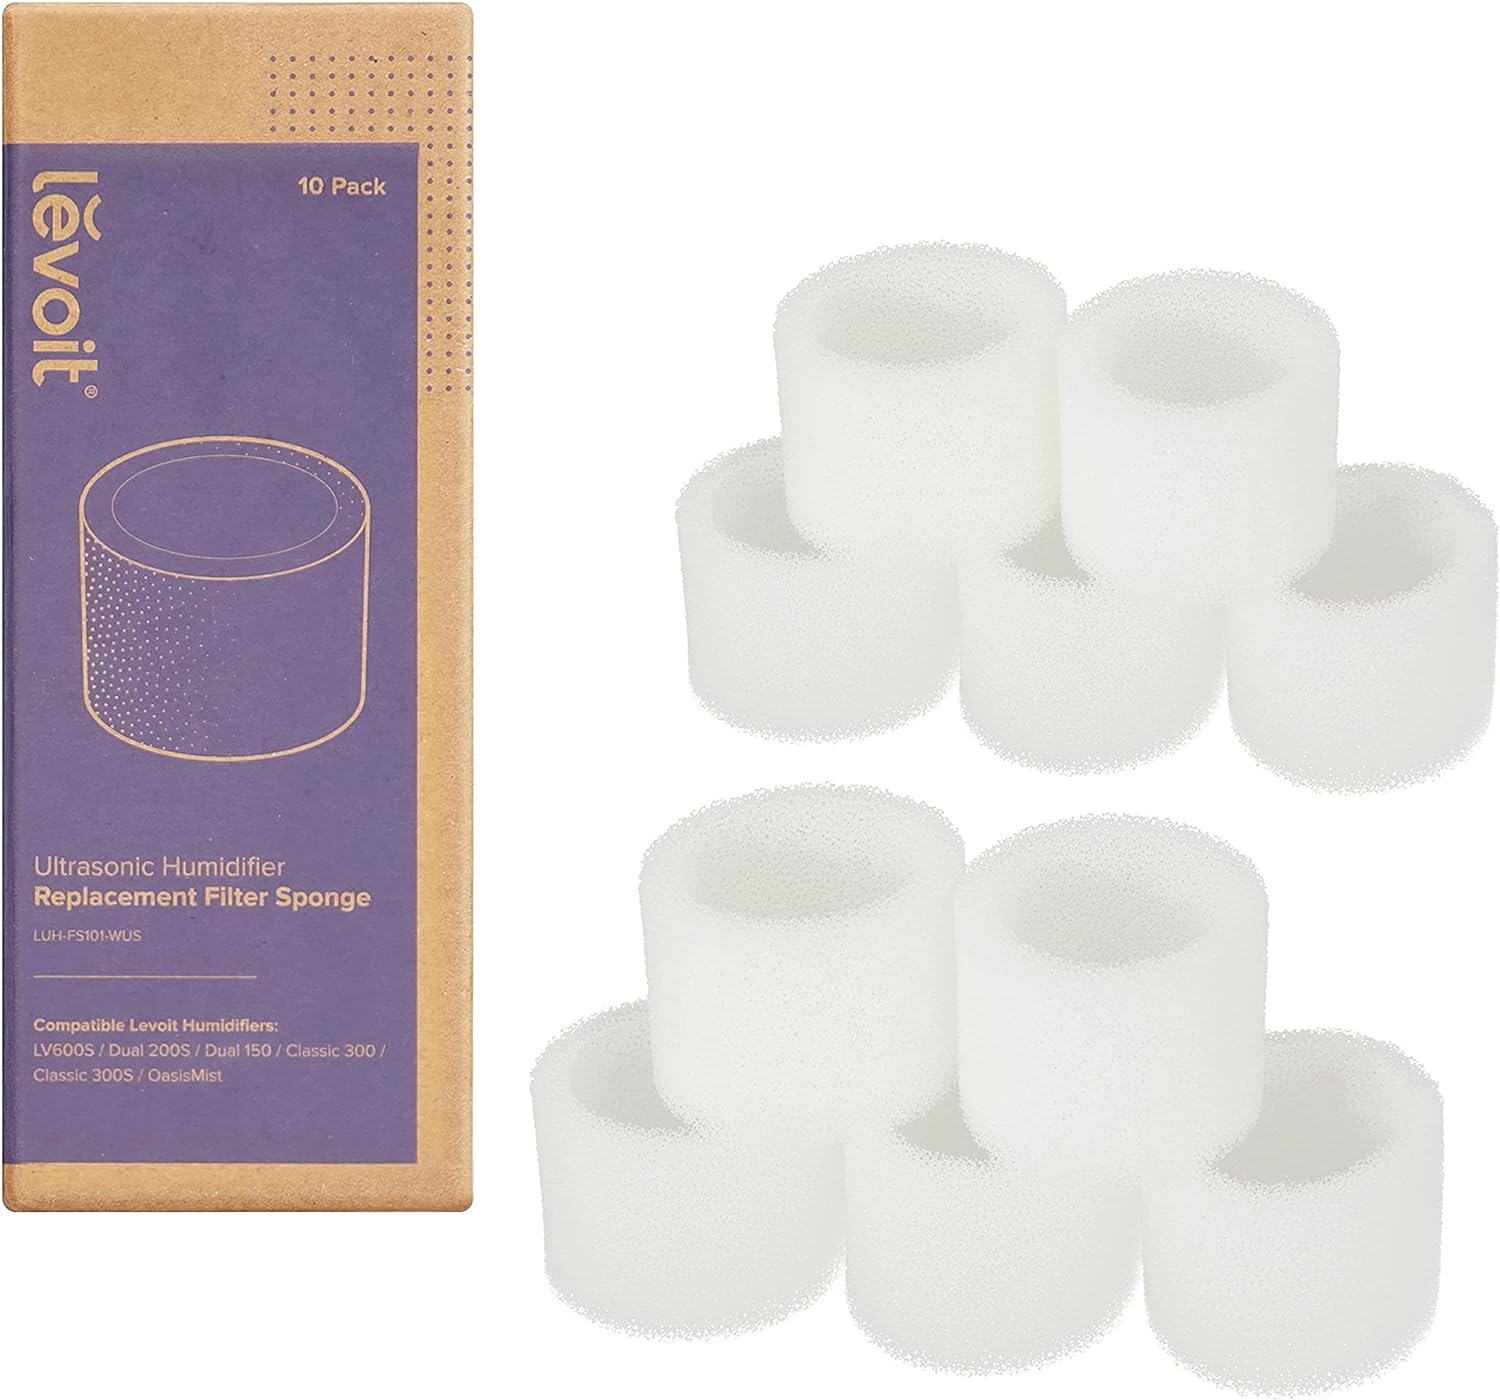 LEVOIT 10Pack Top Fill Humidifier Replacement Filters Capt - Alaska - Anchorage ID1551246